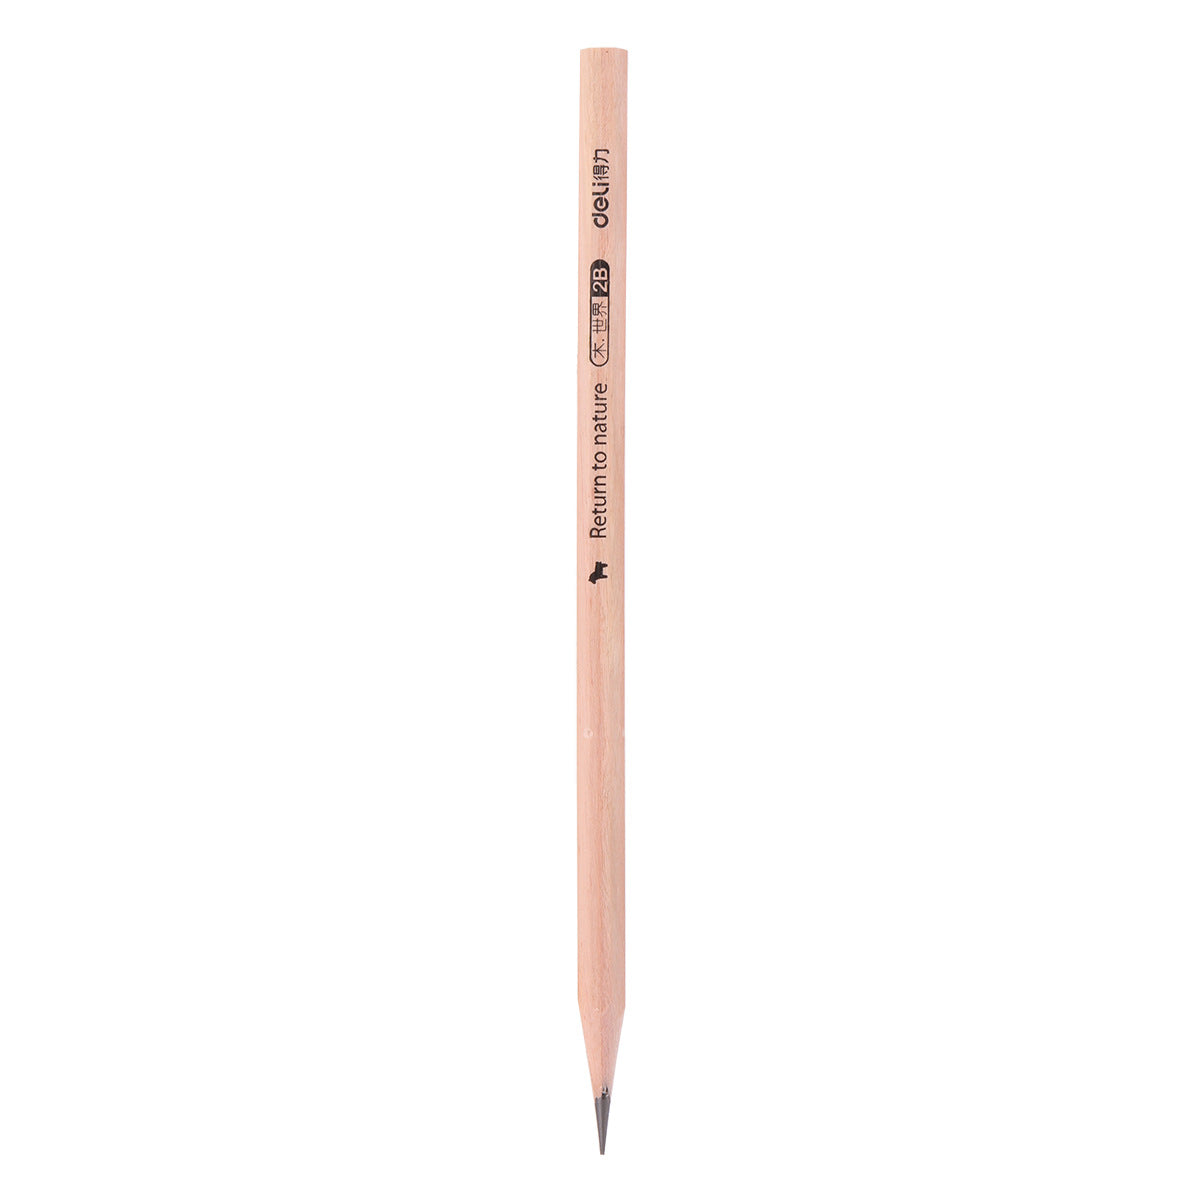 DELI 2B HB Wooden Pencils for School Office,Pack of 50